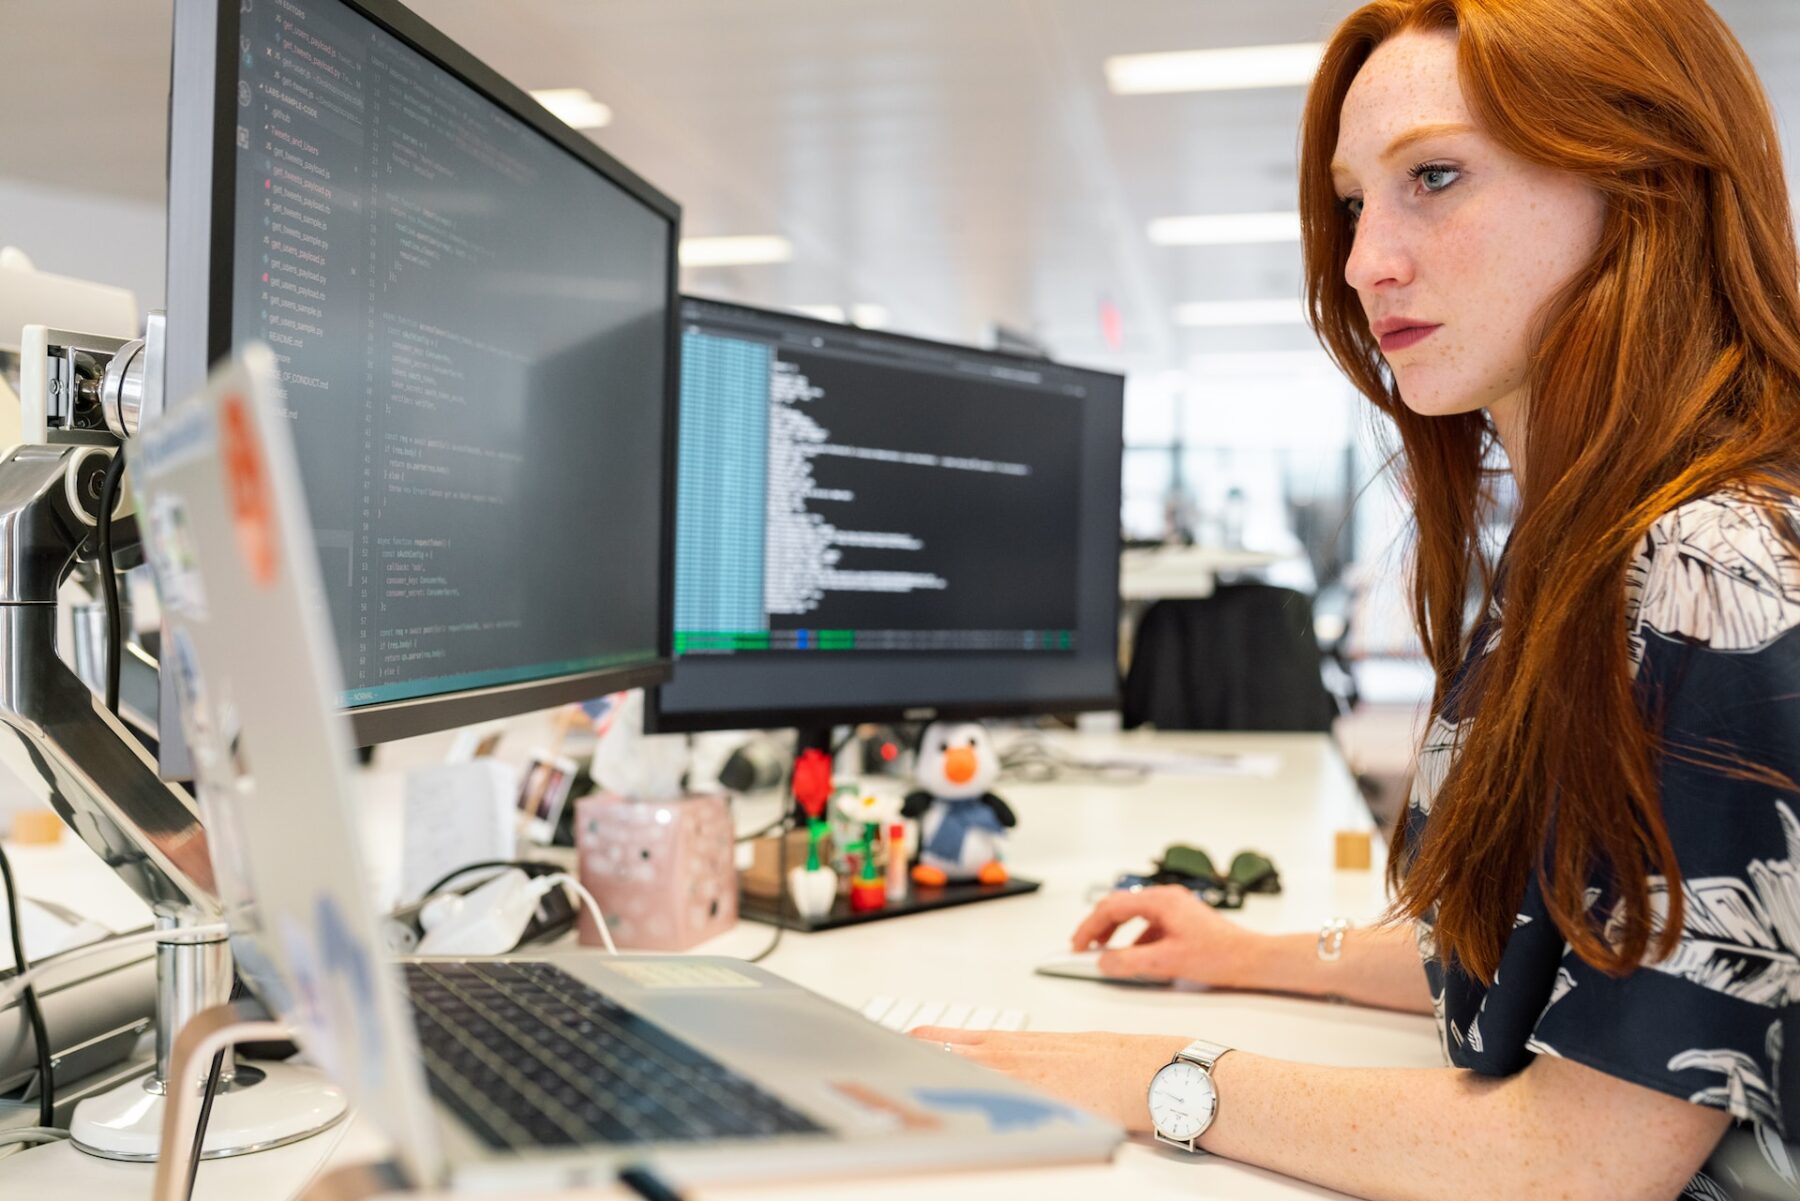 Image of a woman sitting at a desk and coding – technical skills are also important for building teams that thrive.